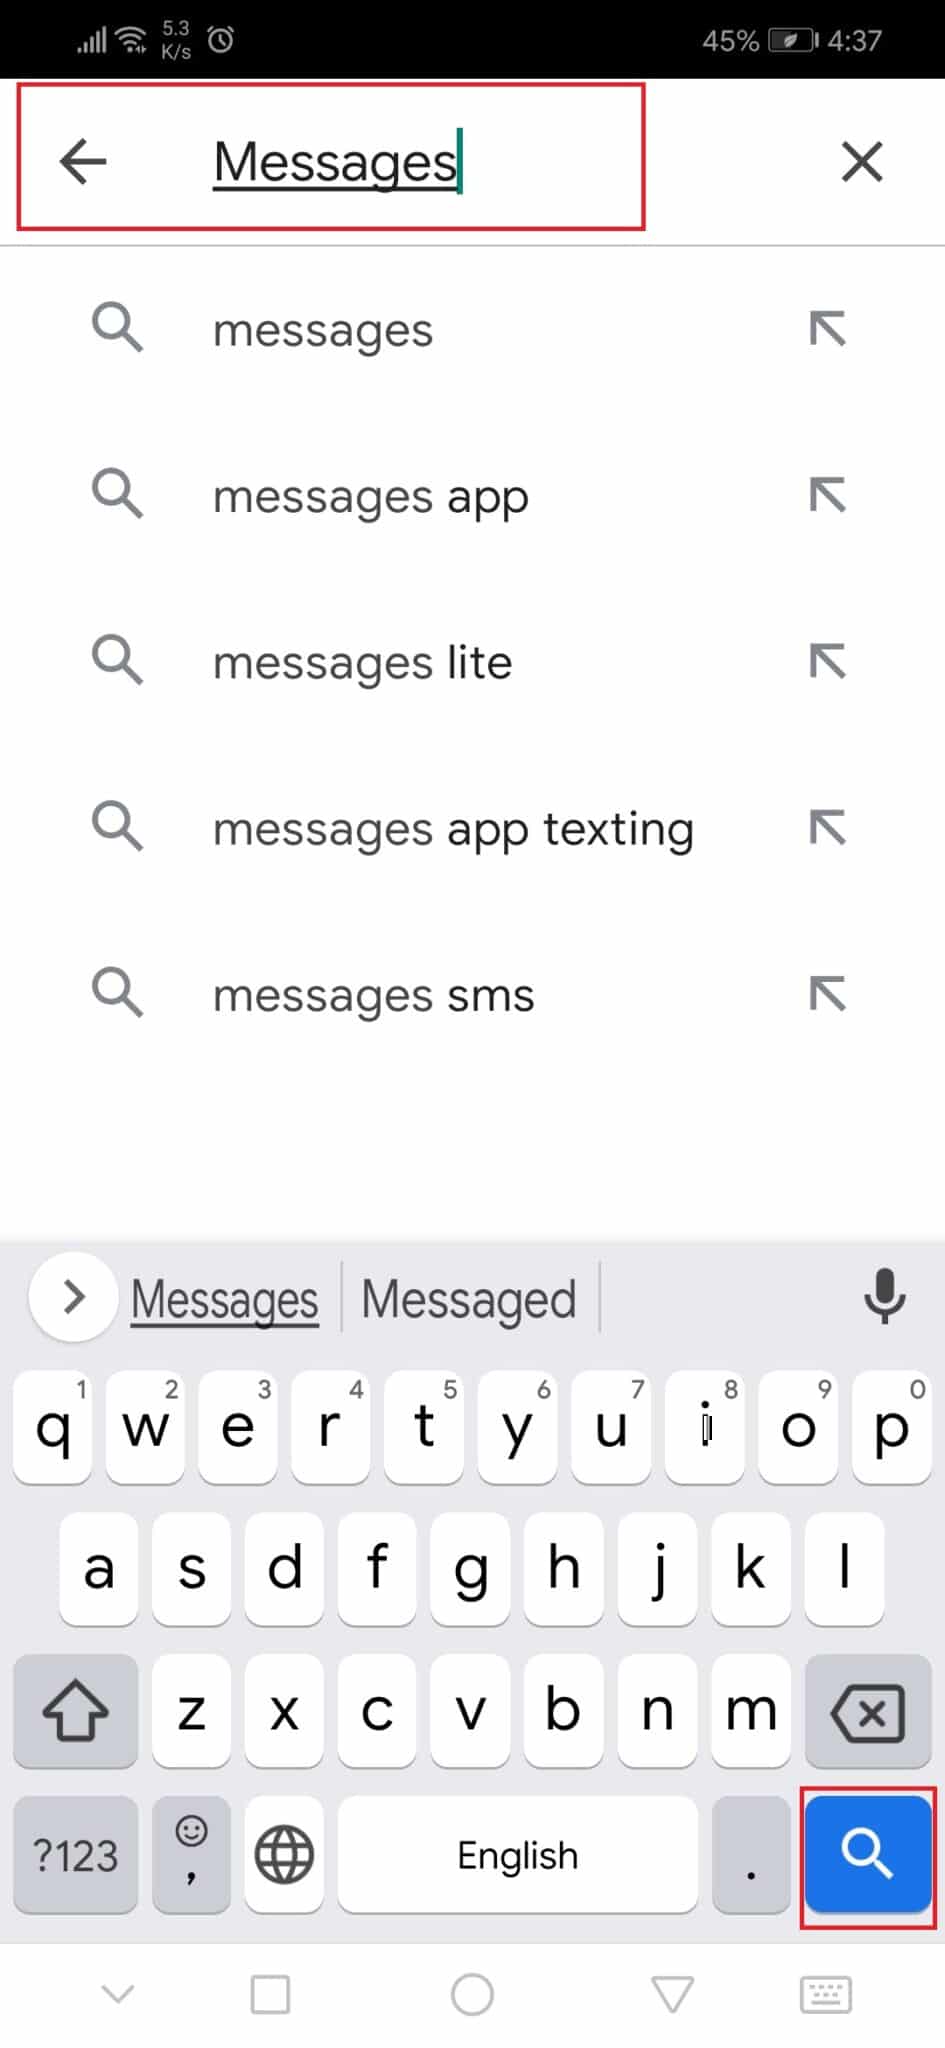 search for messages app in google play store